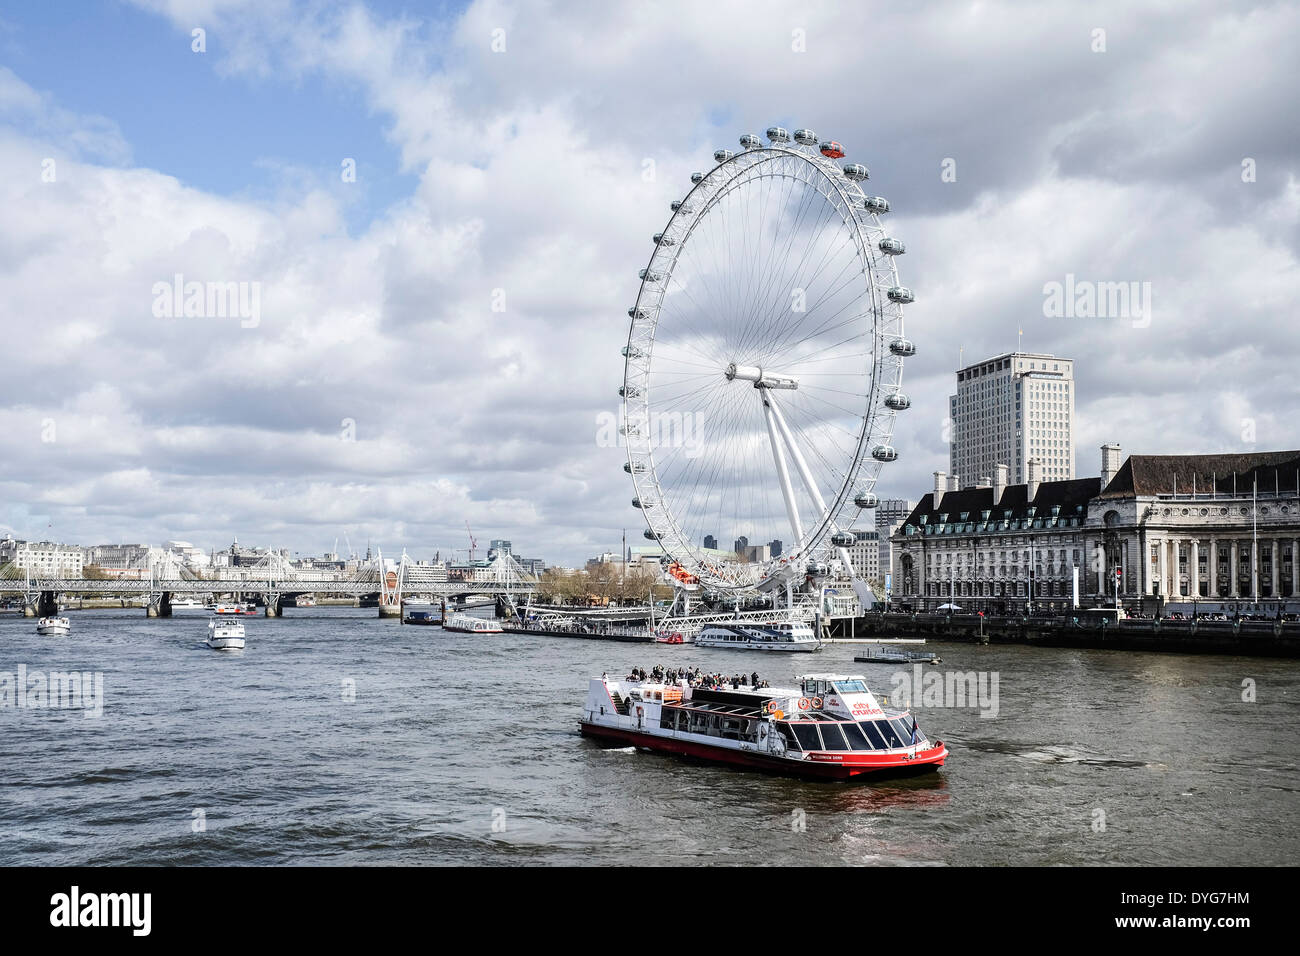 The River Thames. Stock Photo